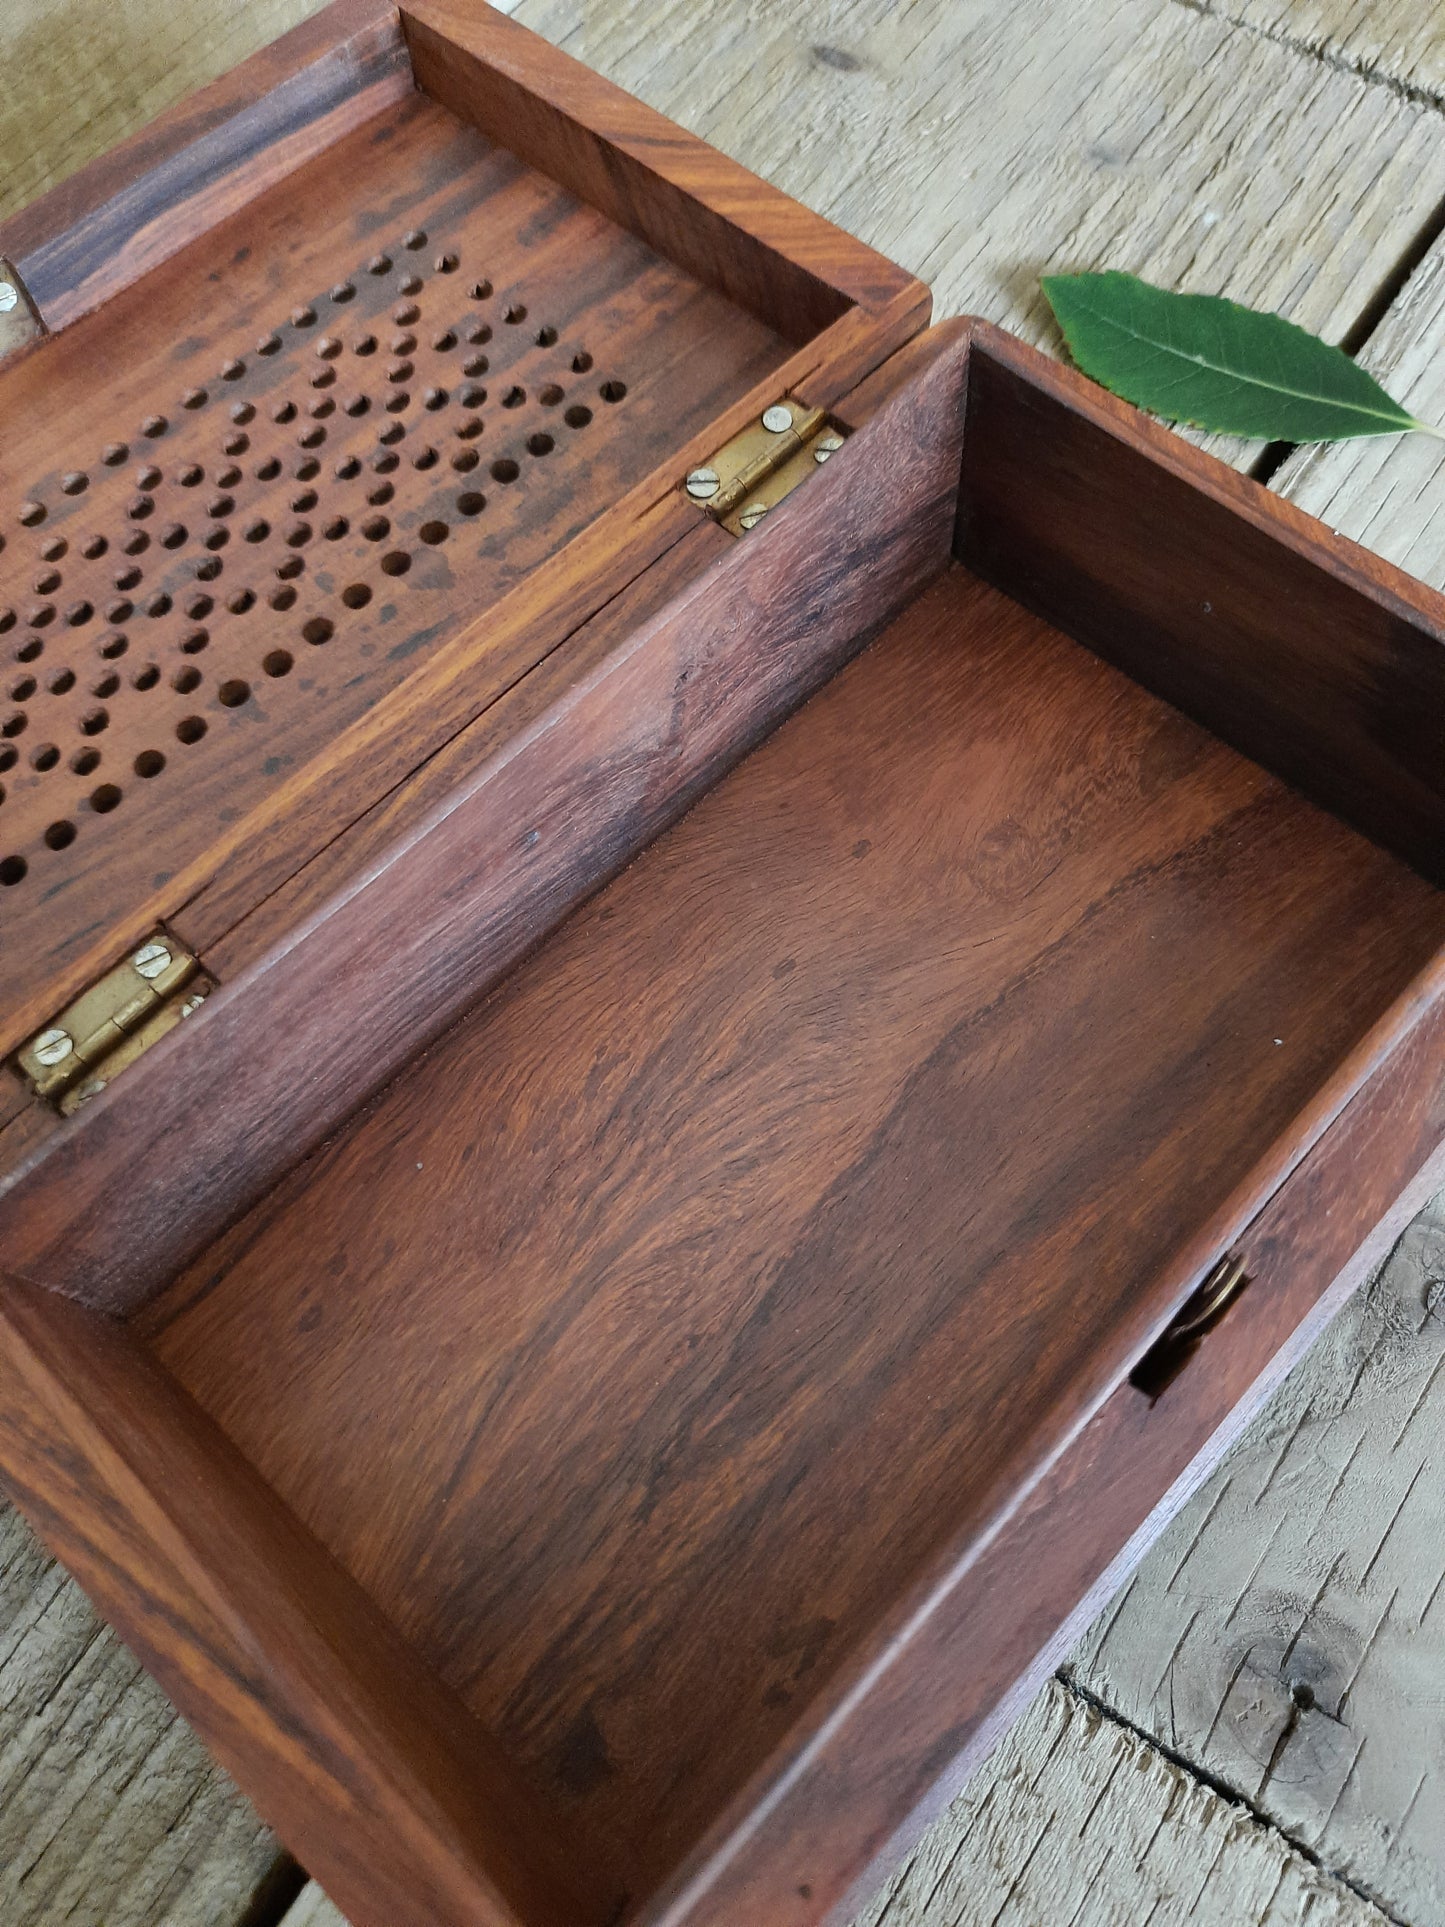 Sustainable Company | Secret Jewellery Box | Ethical Store | Jewelry Box For Women